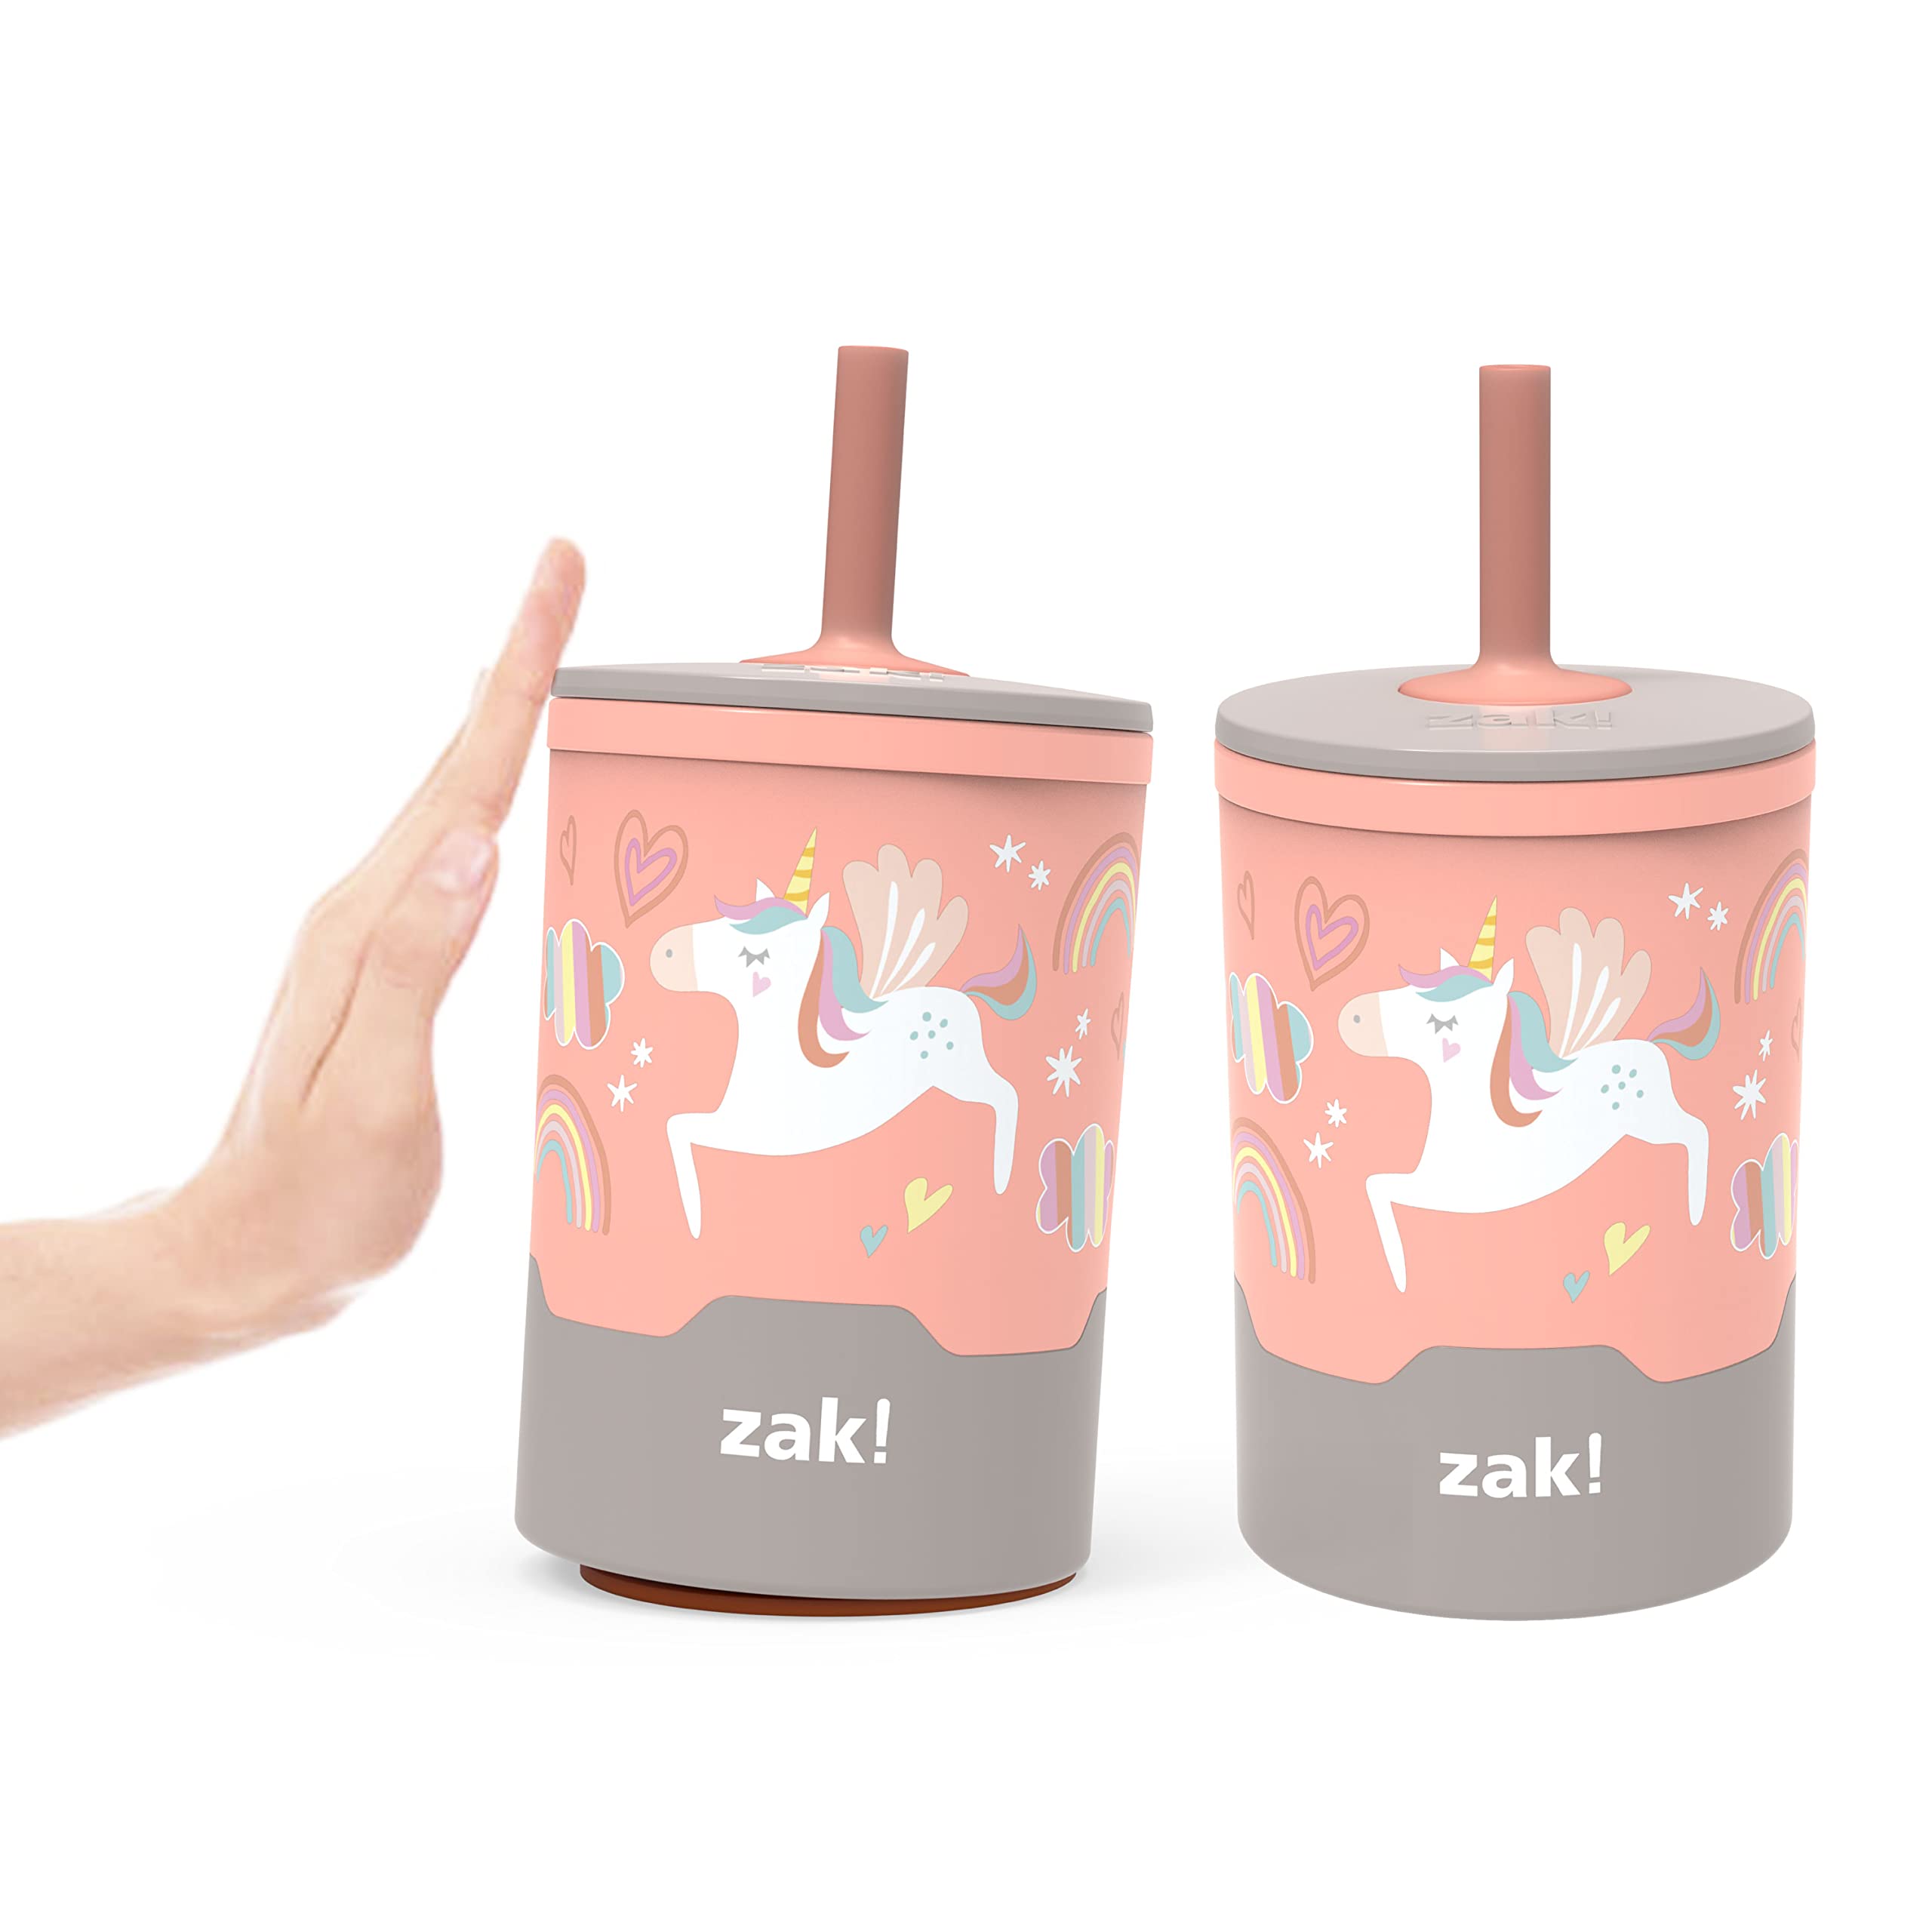 Love the Zak Designs tumbler! Do you use it with your child? What